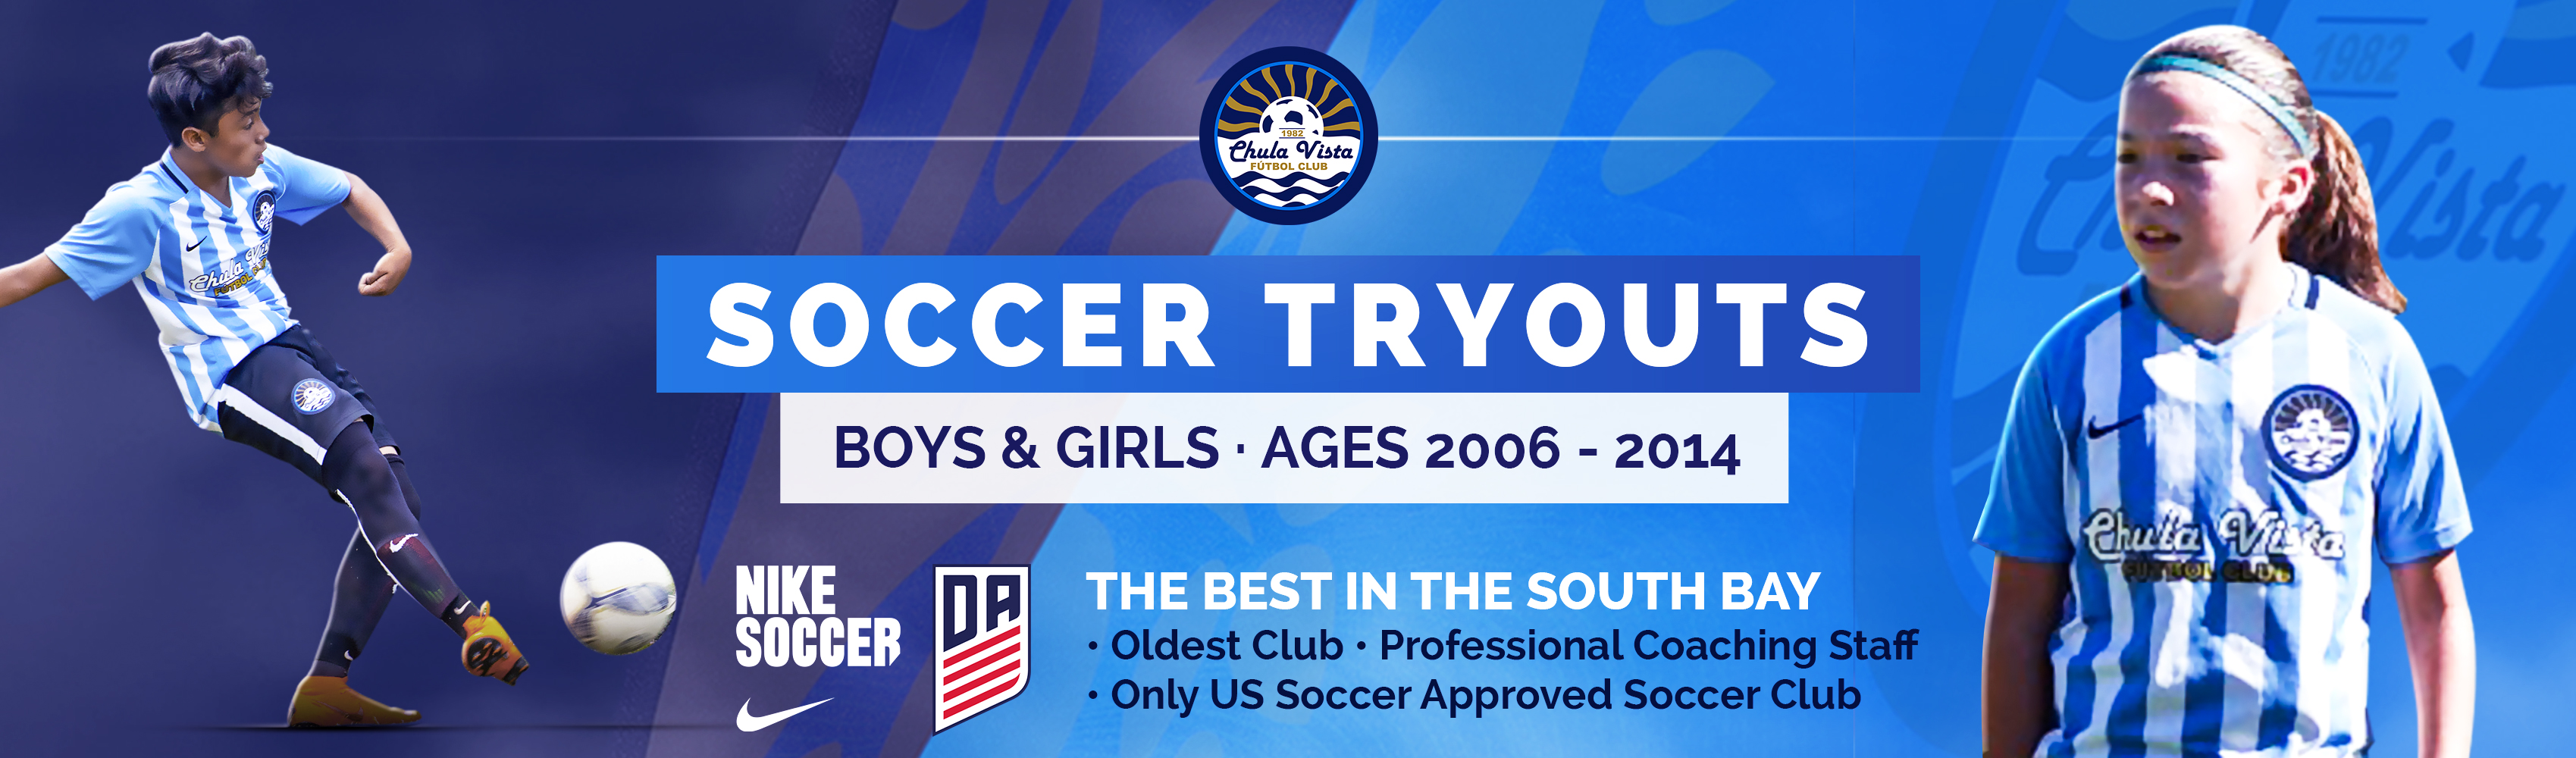 Chula Vista FC Announces Youth Tryouts